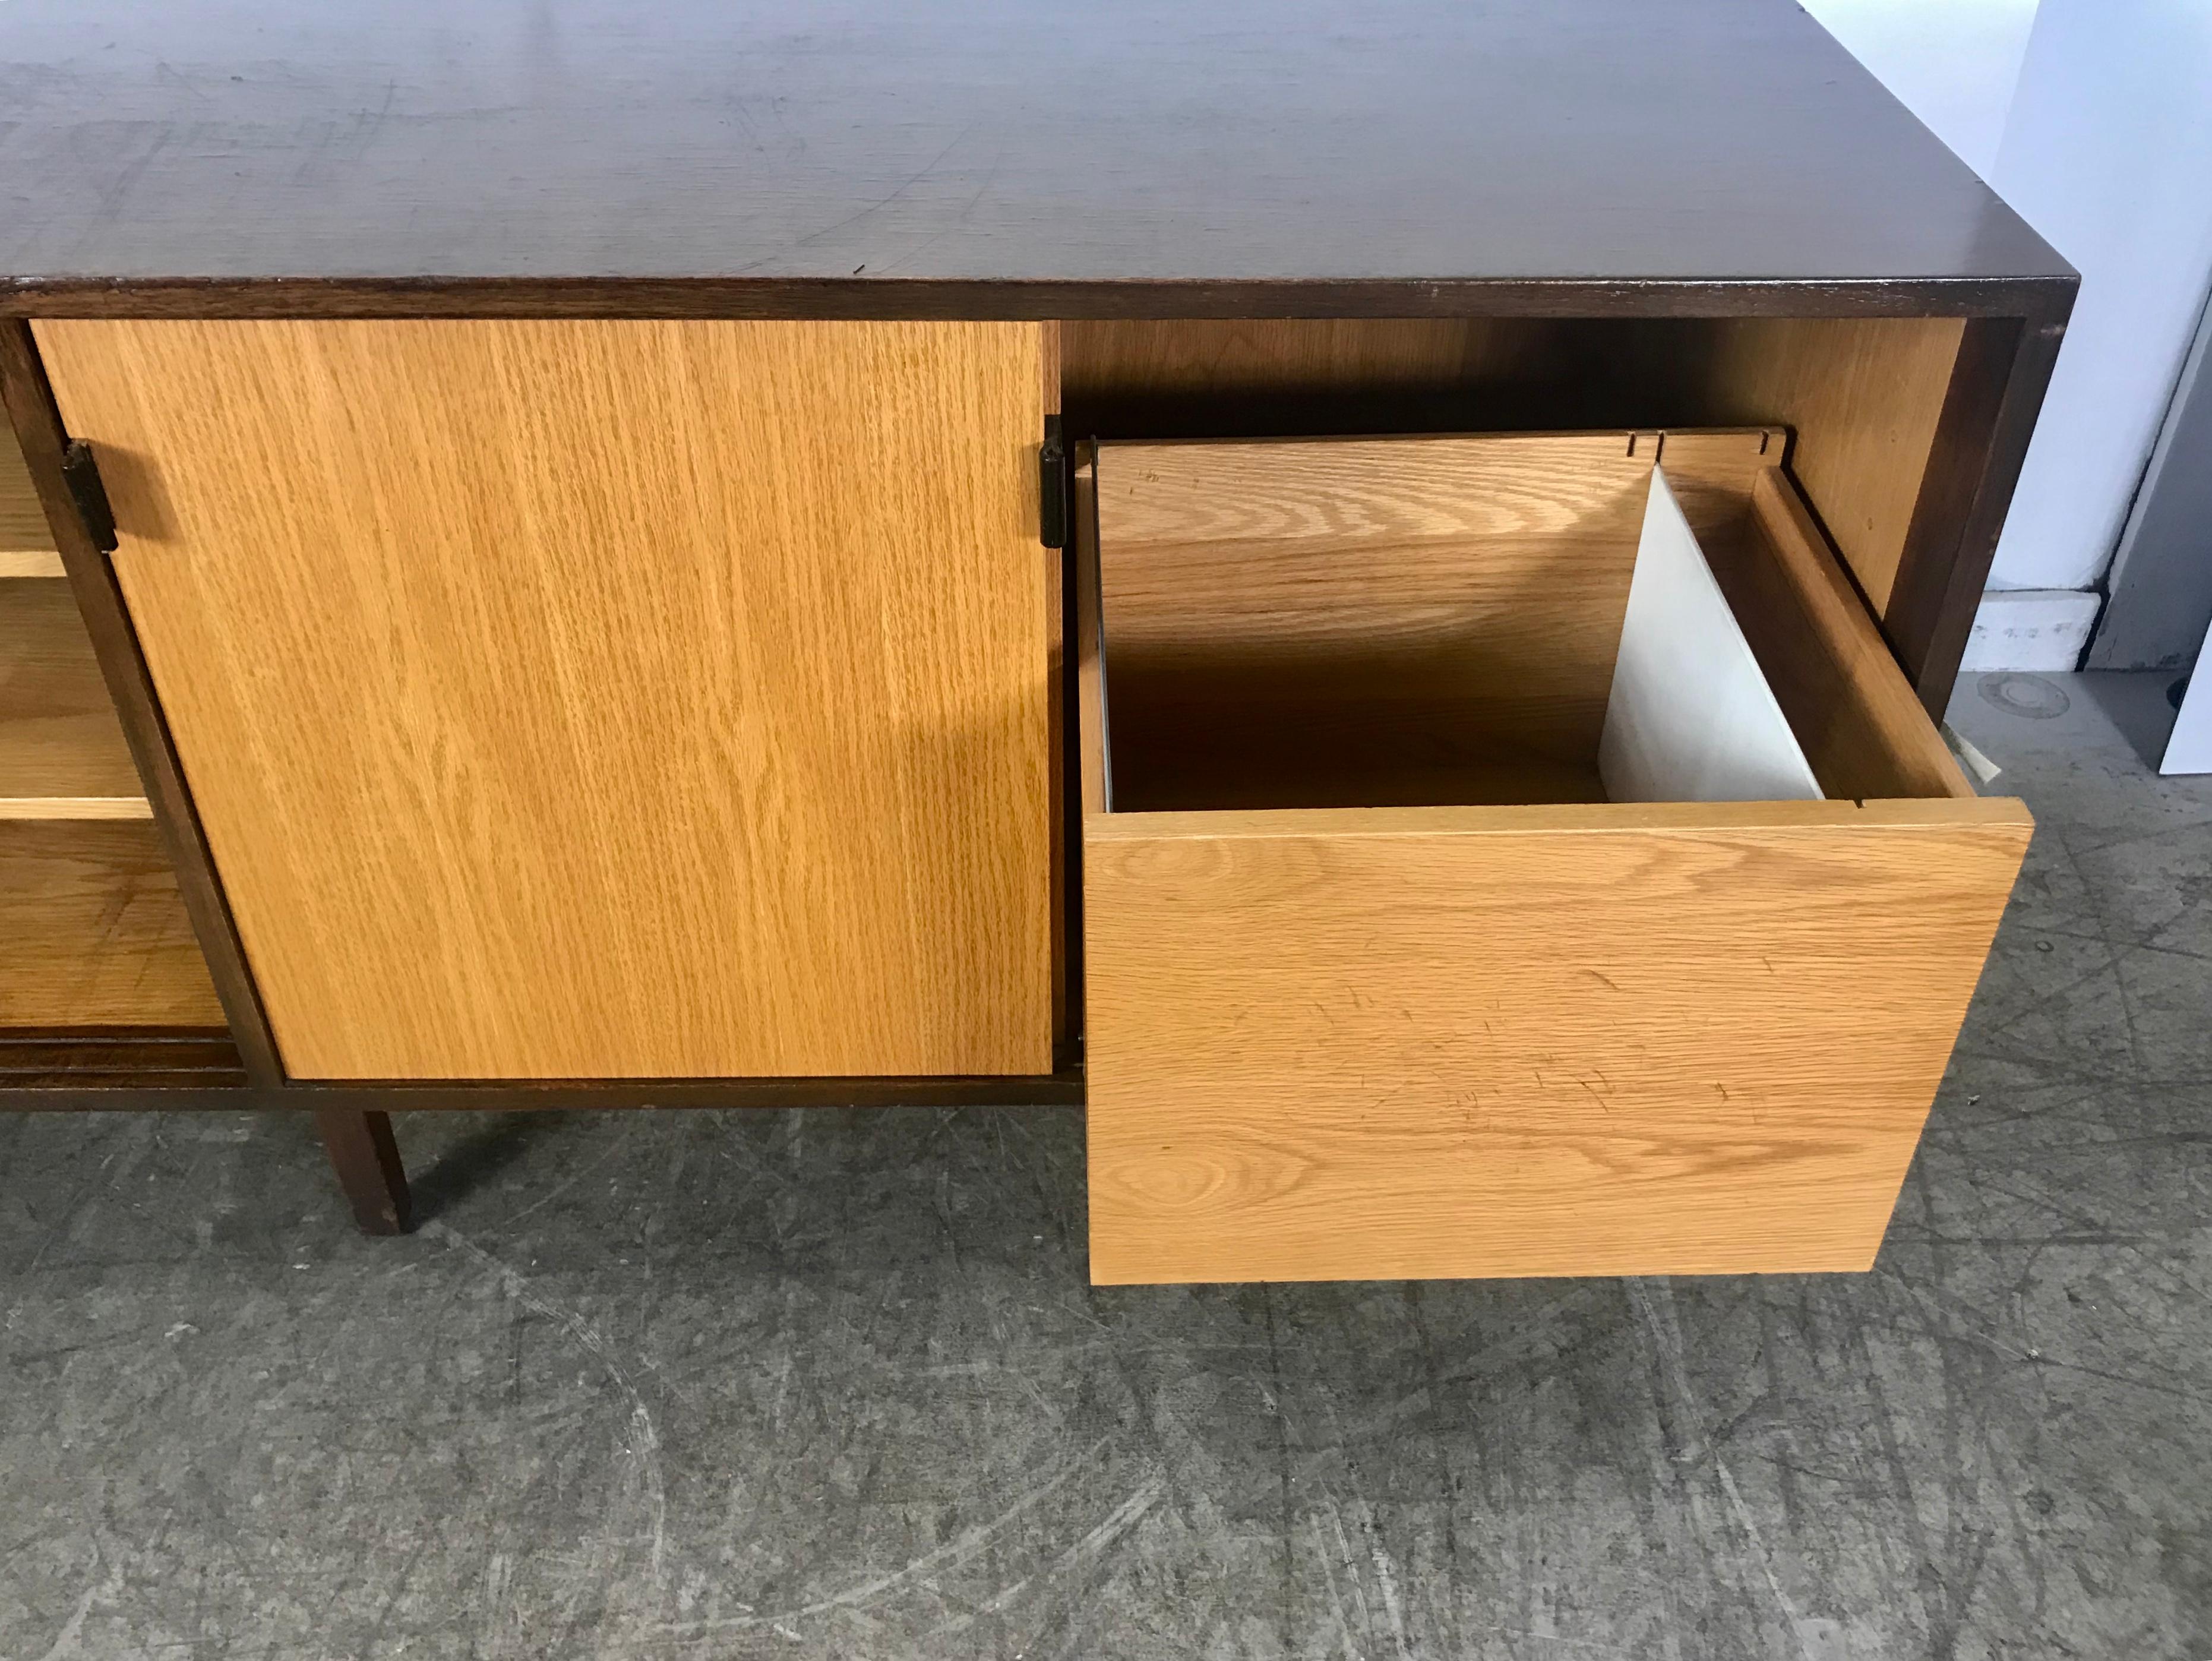 Leather Classic Modernist Florence Knoll Walnut and Oak Credenza, Early Knoll Label